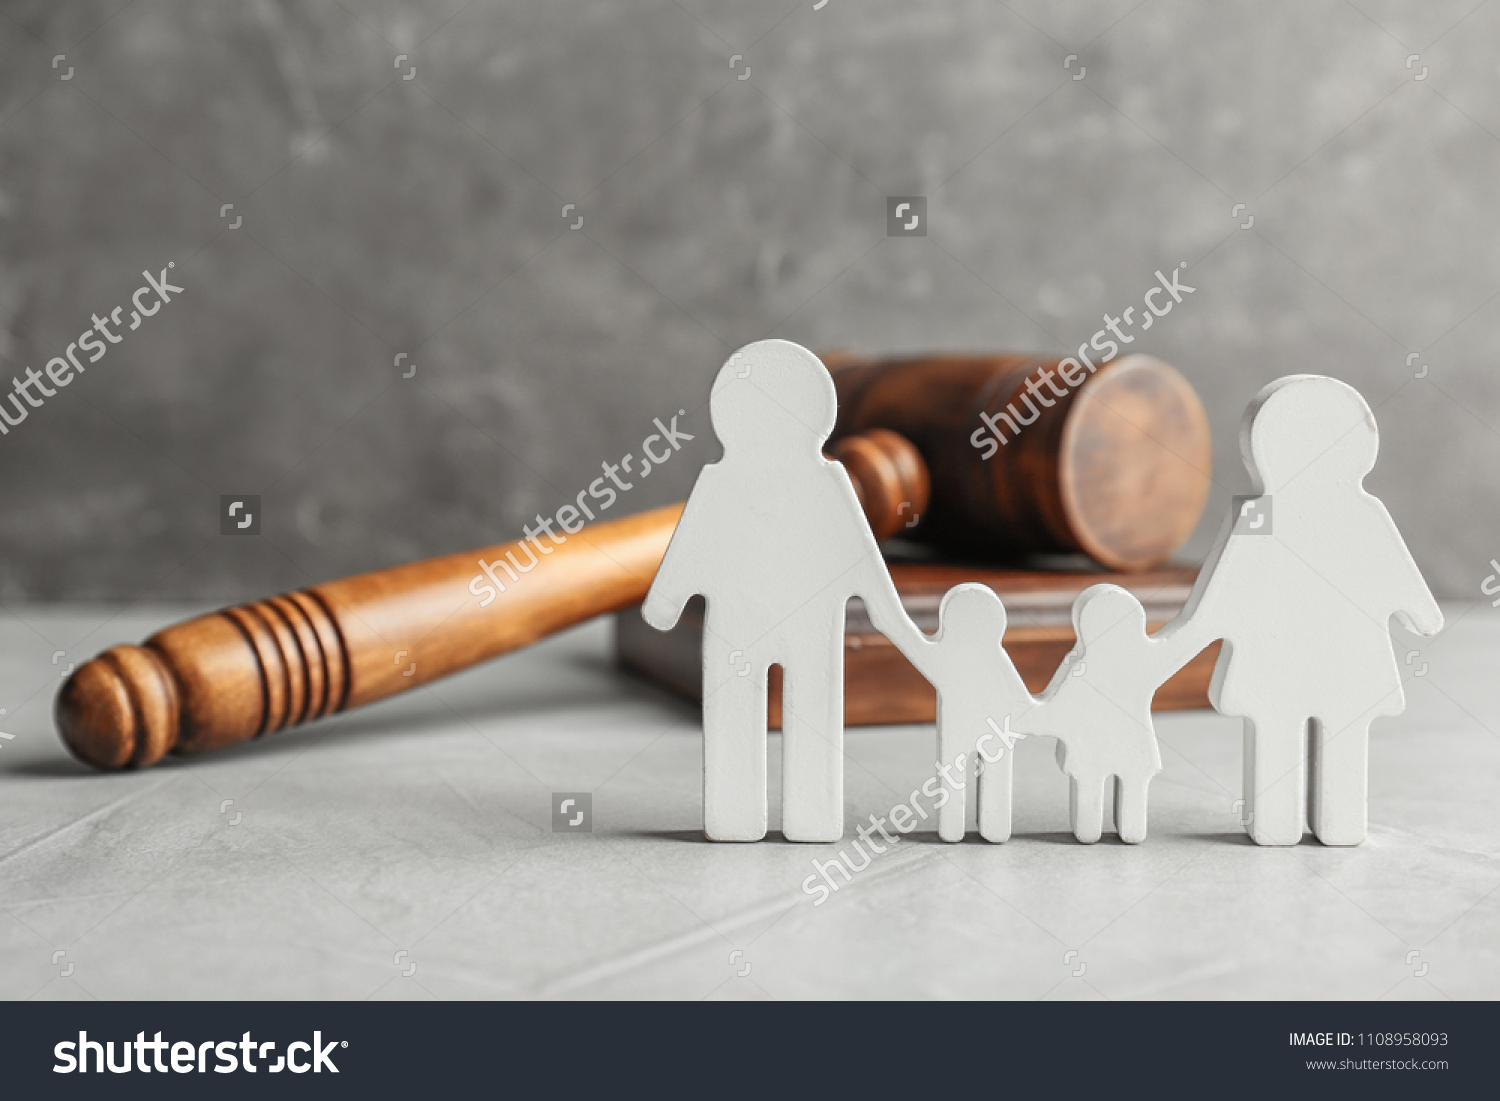 Family figure and gavel on table. Family law concept #1108958093